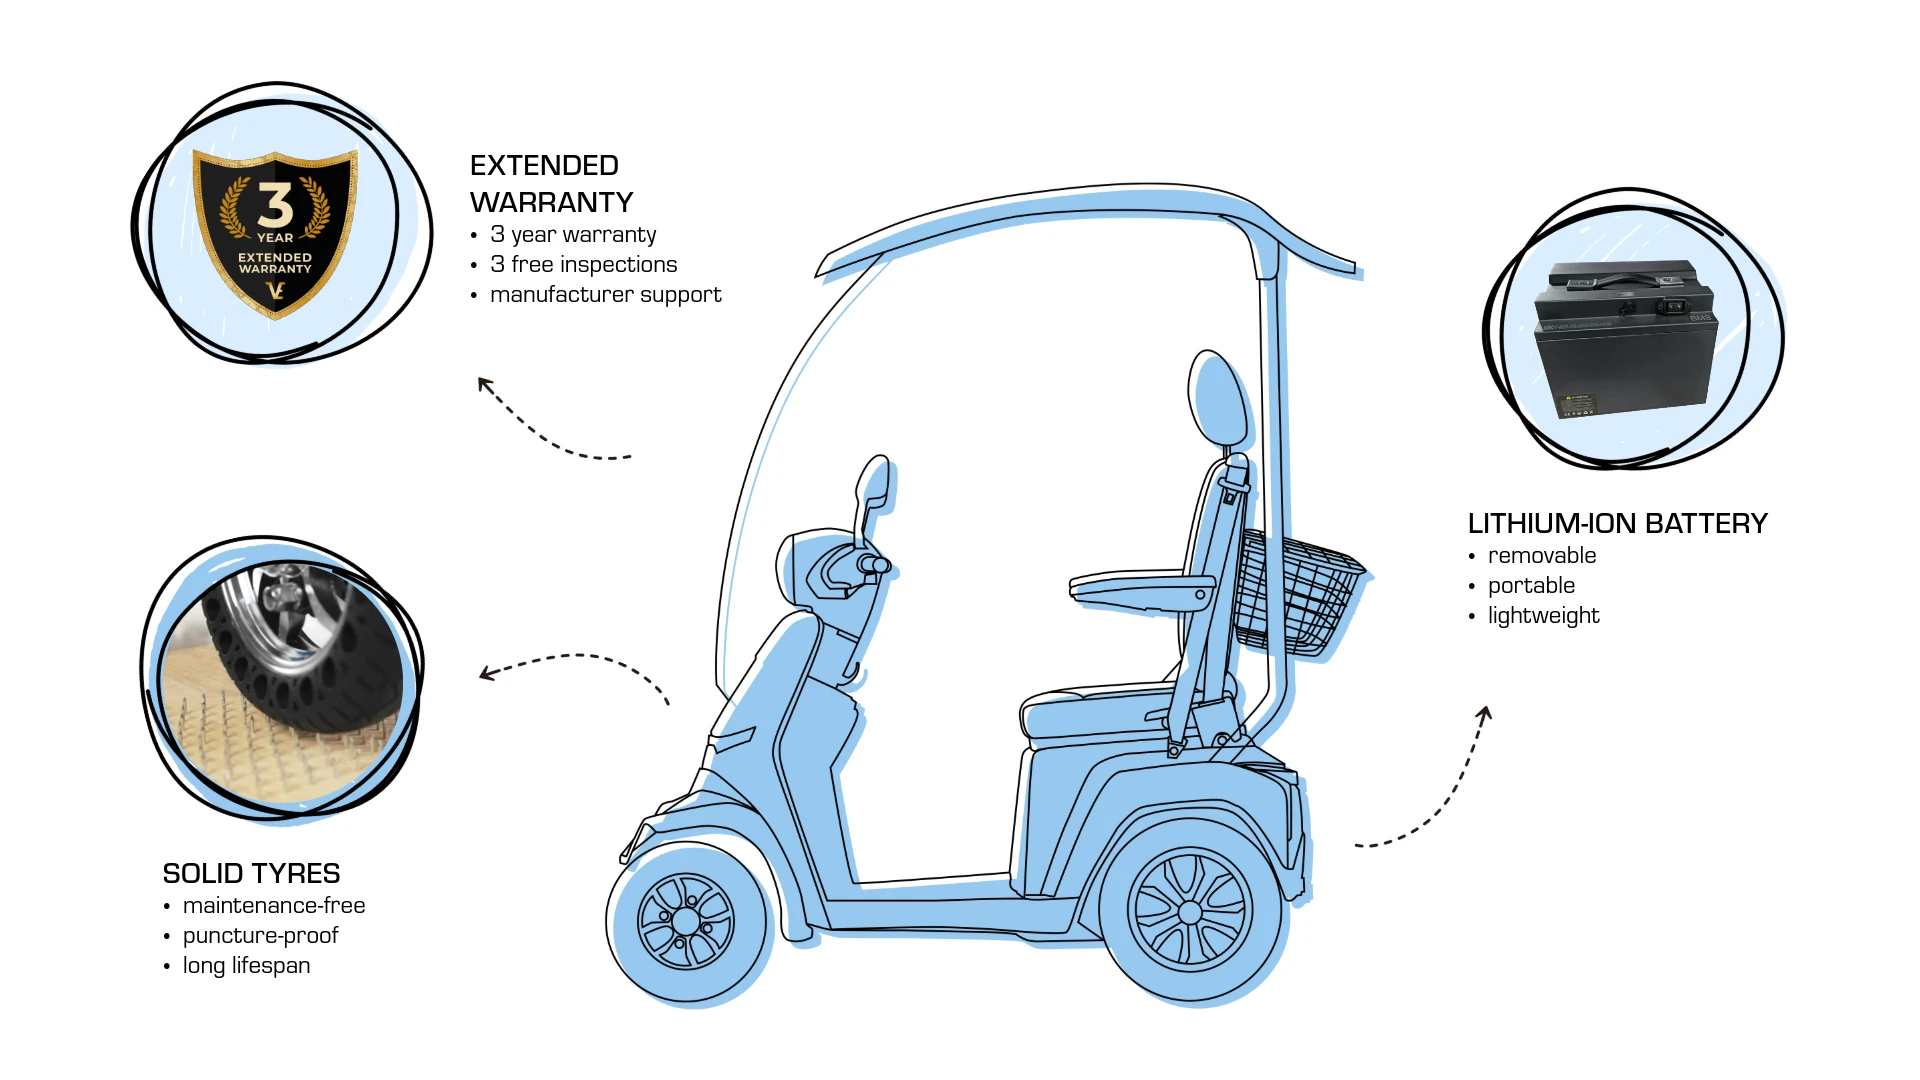 Veleco GRAVIS with roof and captain seat extras, upgrades, solid tyres for mobility scooter, extended warranty, lithium-ion battery